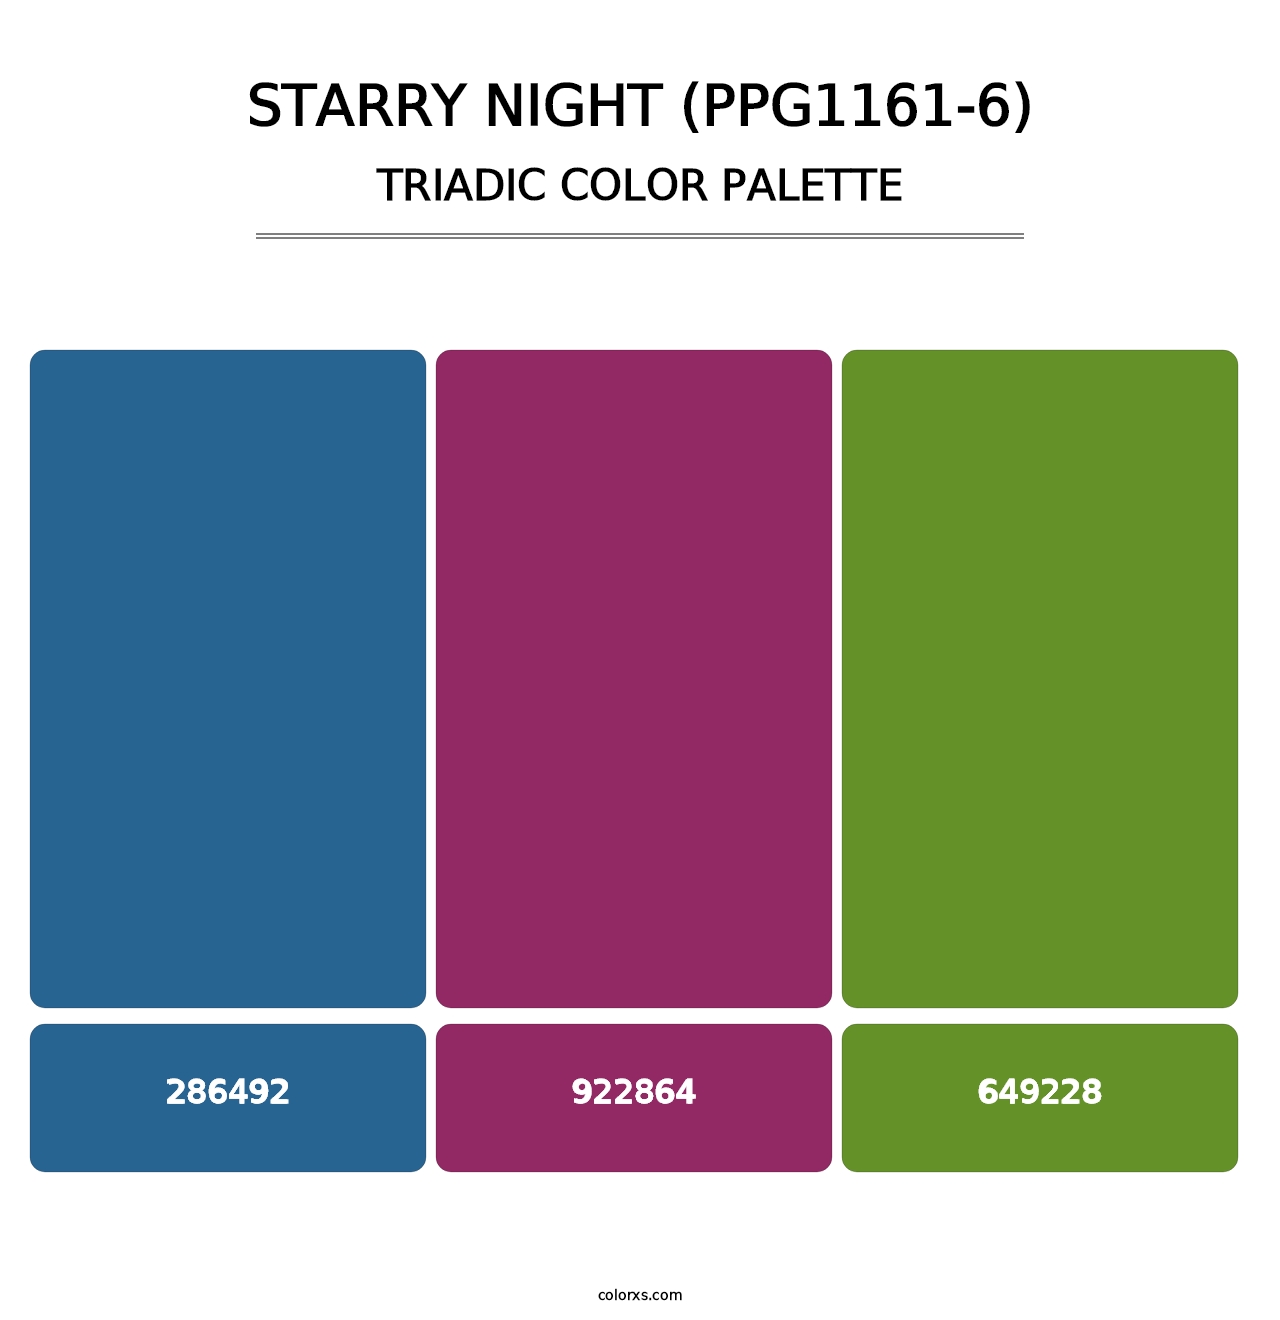 Starry Night (PPG1161-6) - Triadic Color Palette